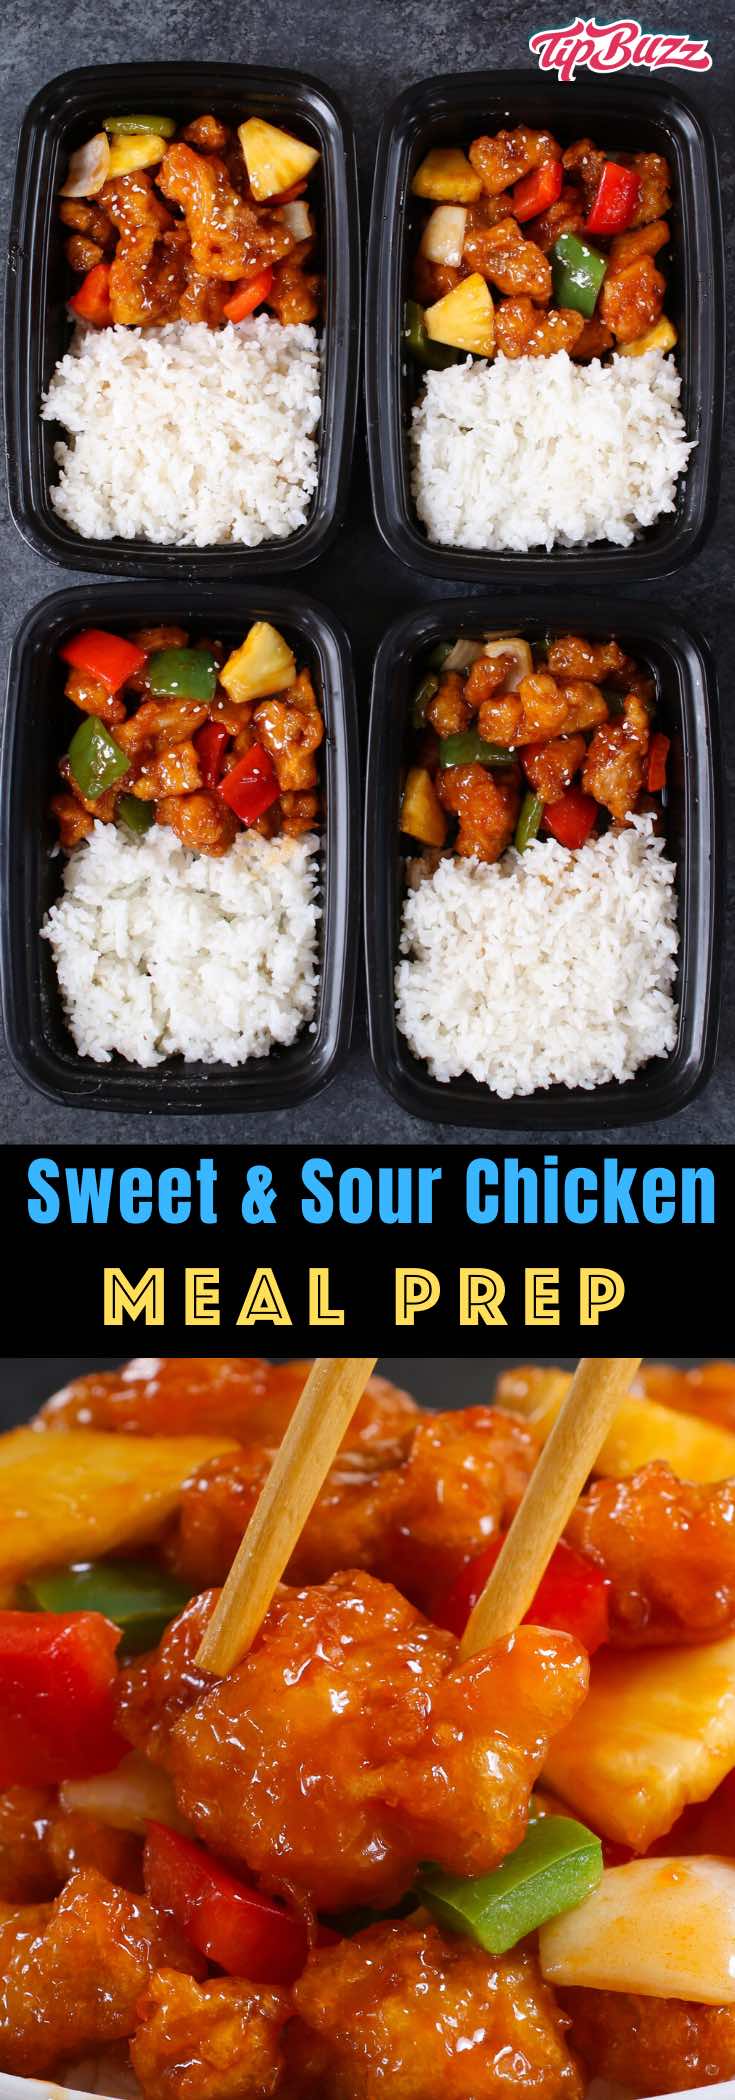 This Sweet and Sour Chicken Meal Prep features crispy chicken, bell peppers, onions and pineapple in a sweet and sour sauce. It only takes 20 minutes to make irresistible lunches and dinners for the entire week! #SweetandSourChicken #ChickenMealPrep